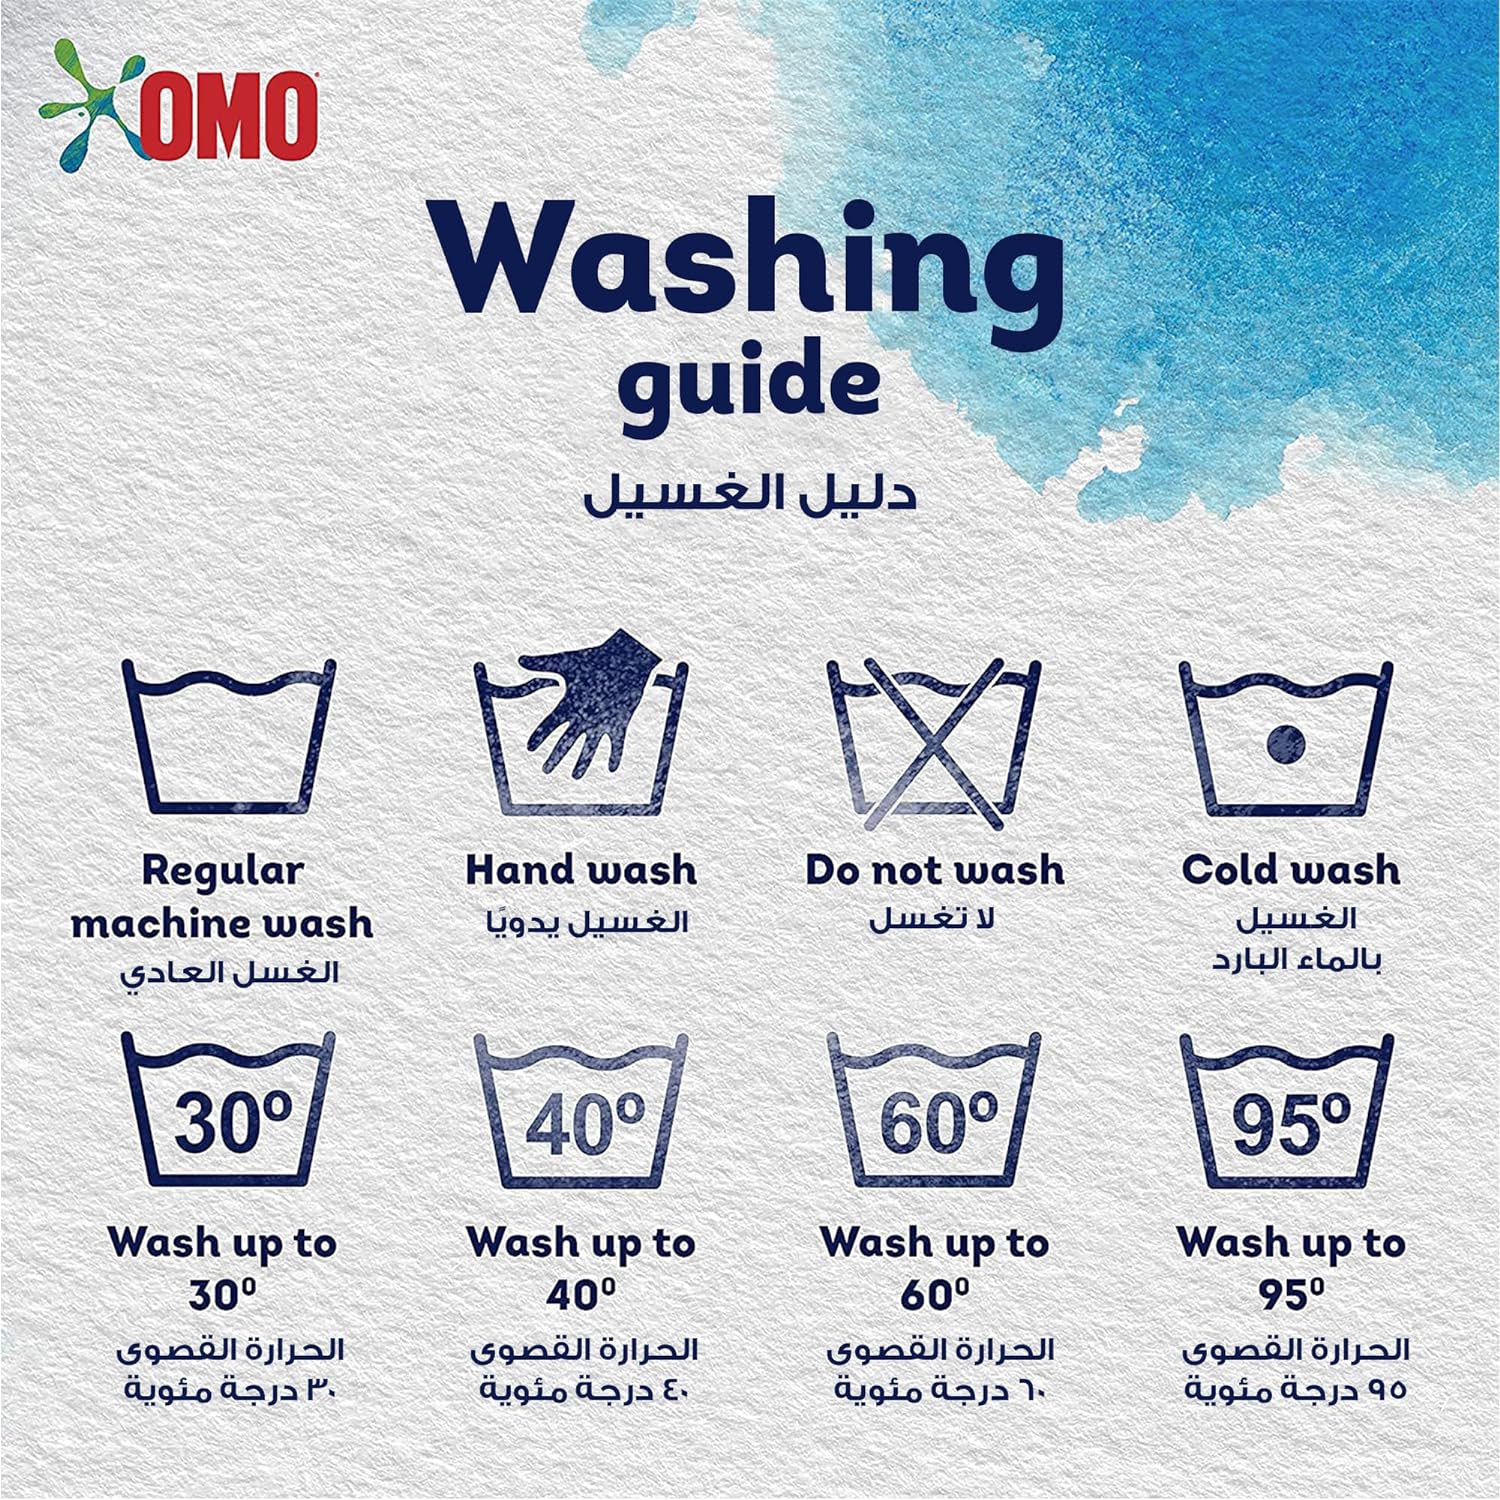 OMO Automatic Antibacterial Laundry Powder Detergent, for 100% effective stain removal, 7Kg